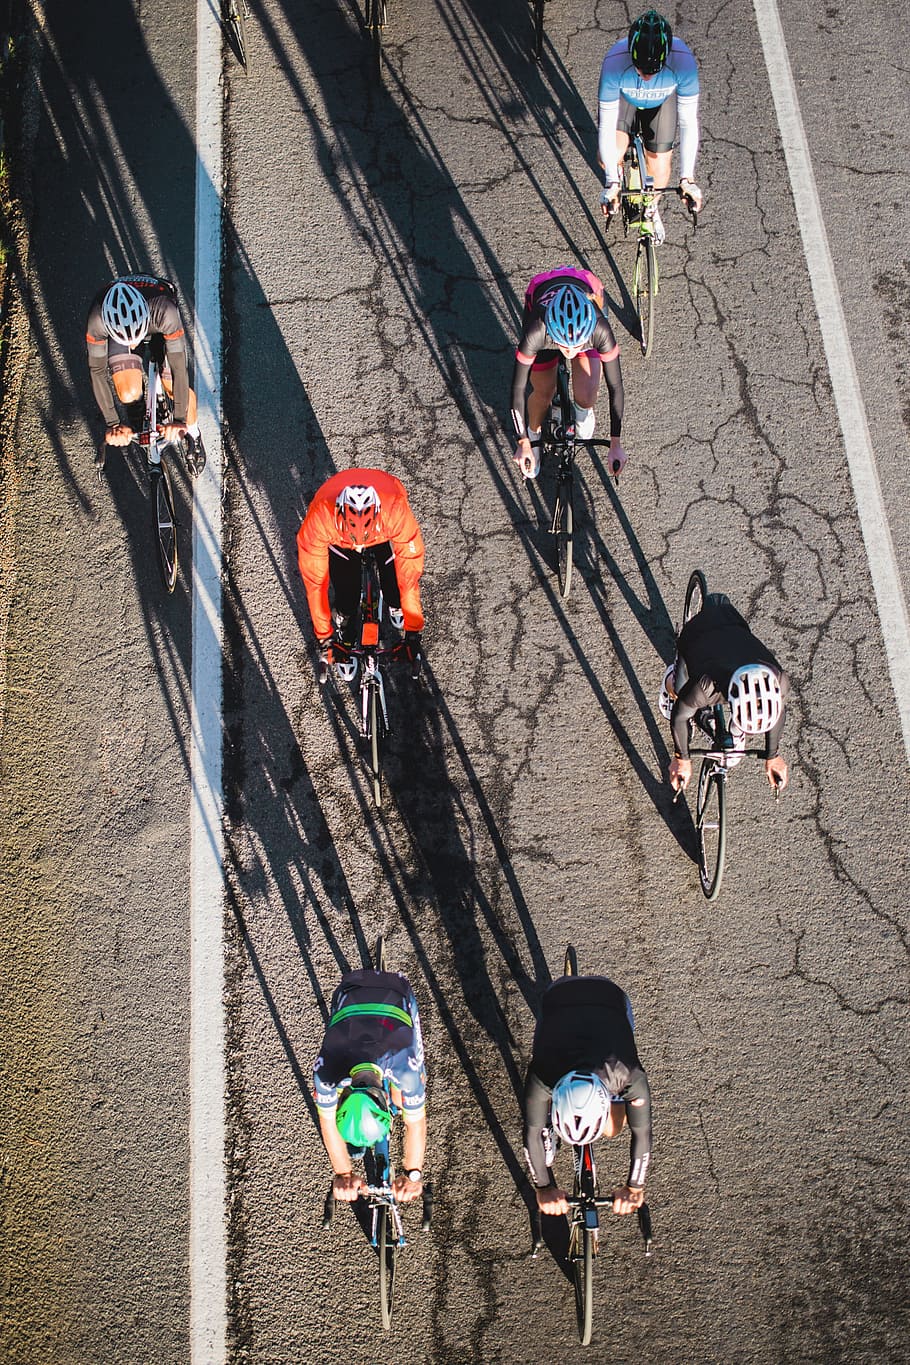 bicycle race view, city, Adult, Bicycling, Bike, Event, Fit, Outdoors, Race, Ride